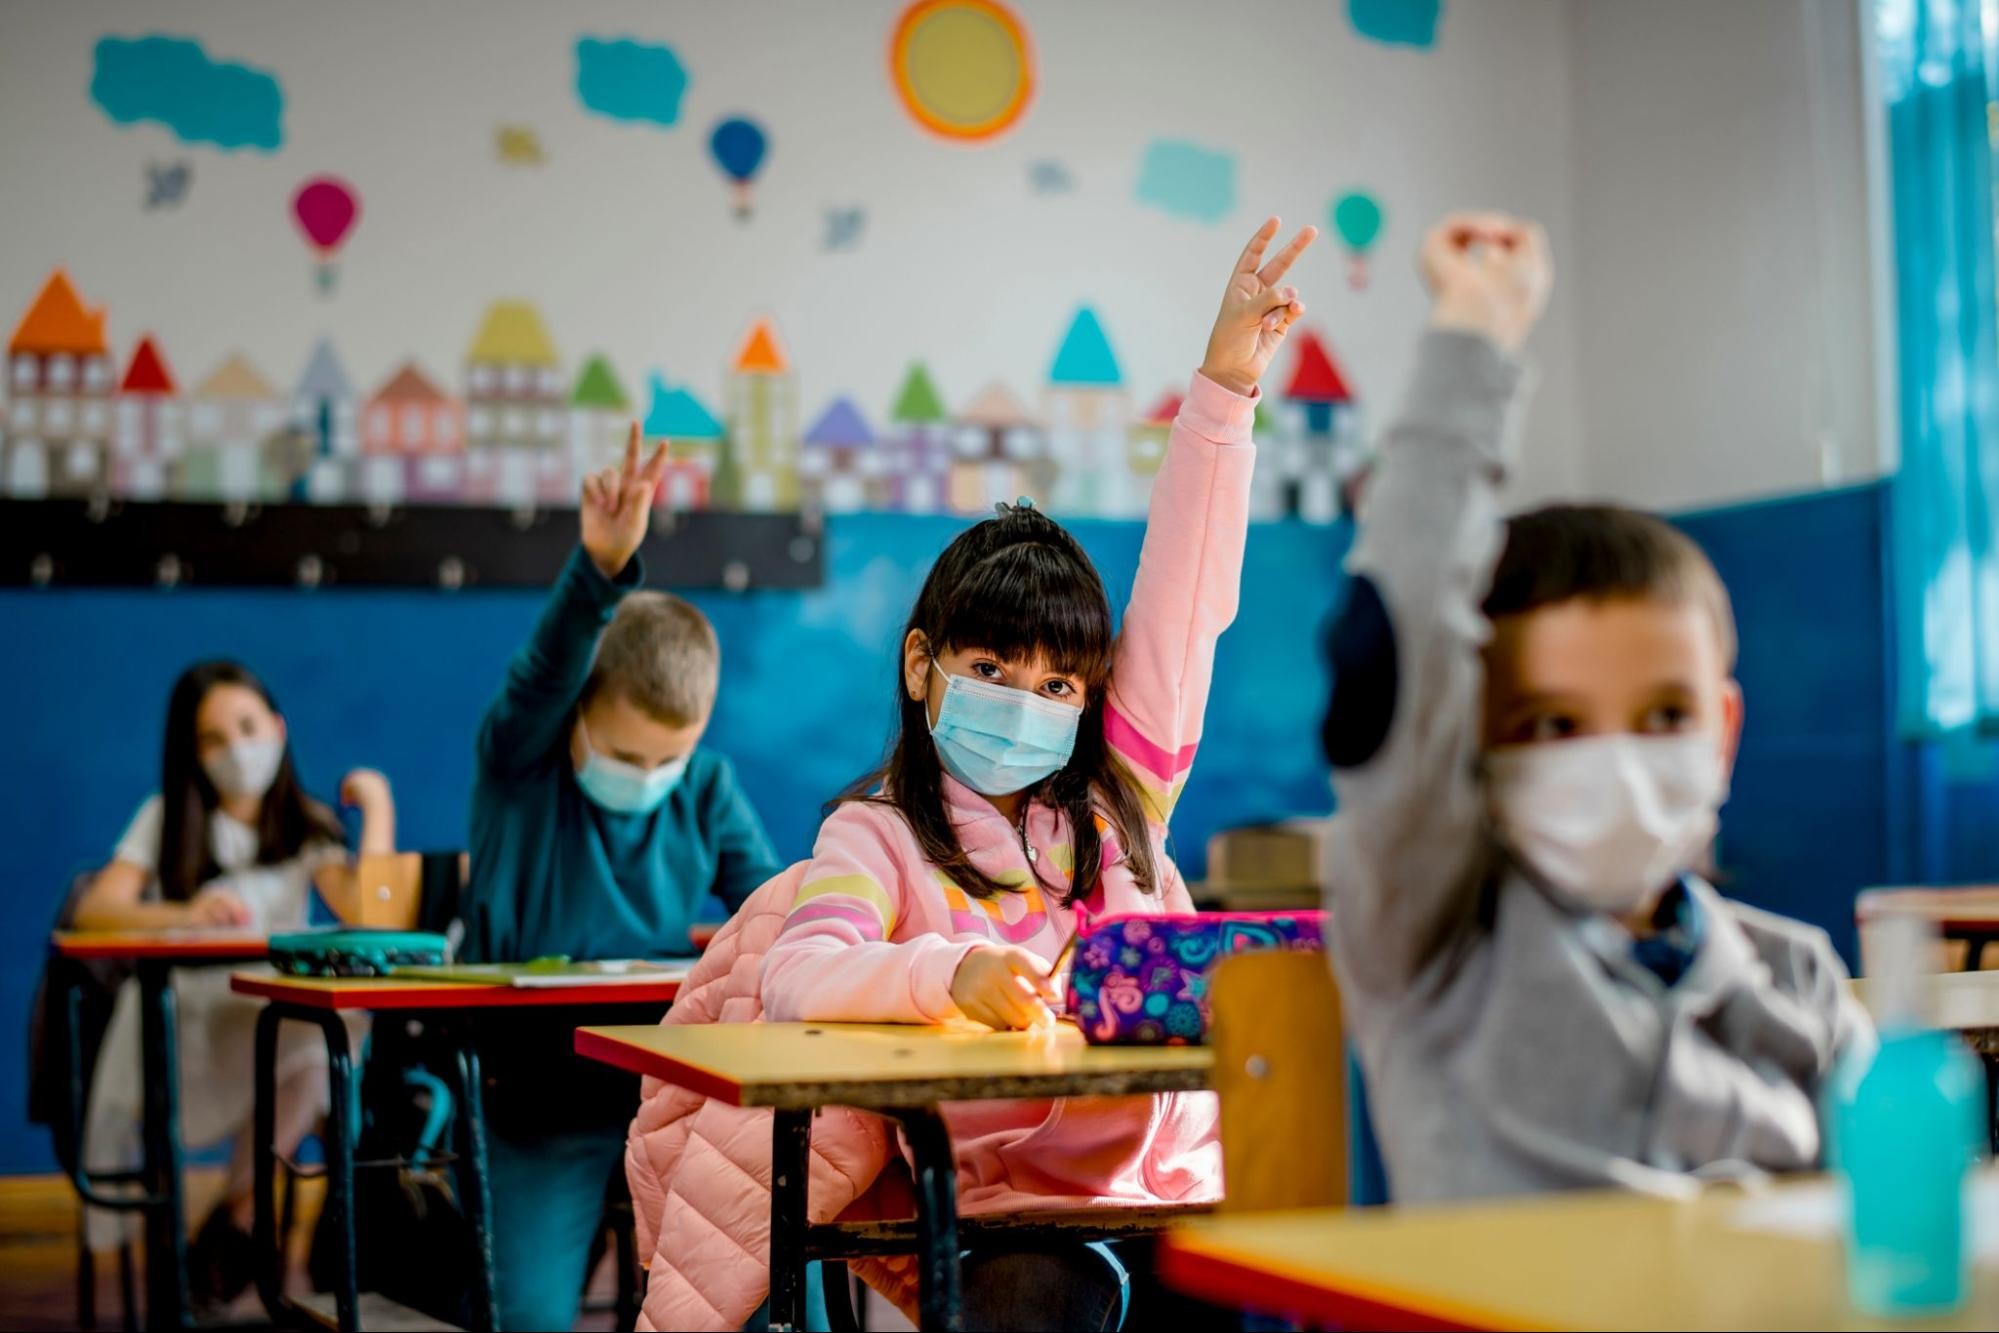 Four children sit in a row of desks, wearing masks and raising their hands, as they return to in-person learning after COVID-19.